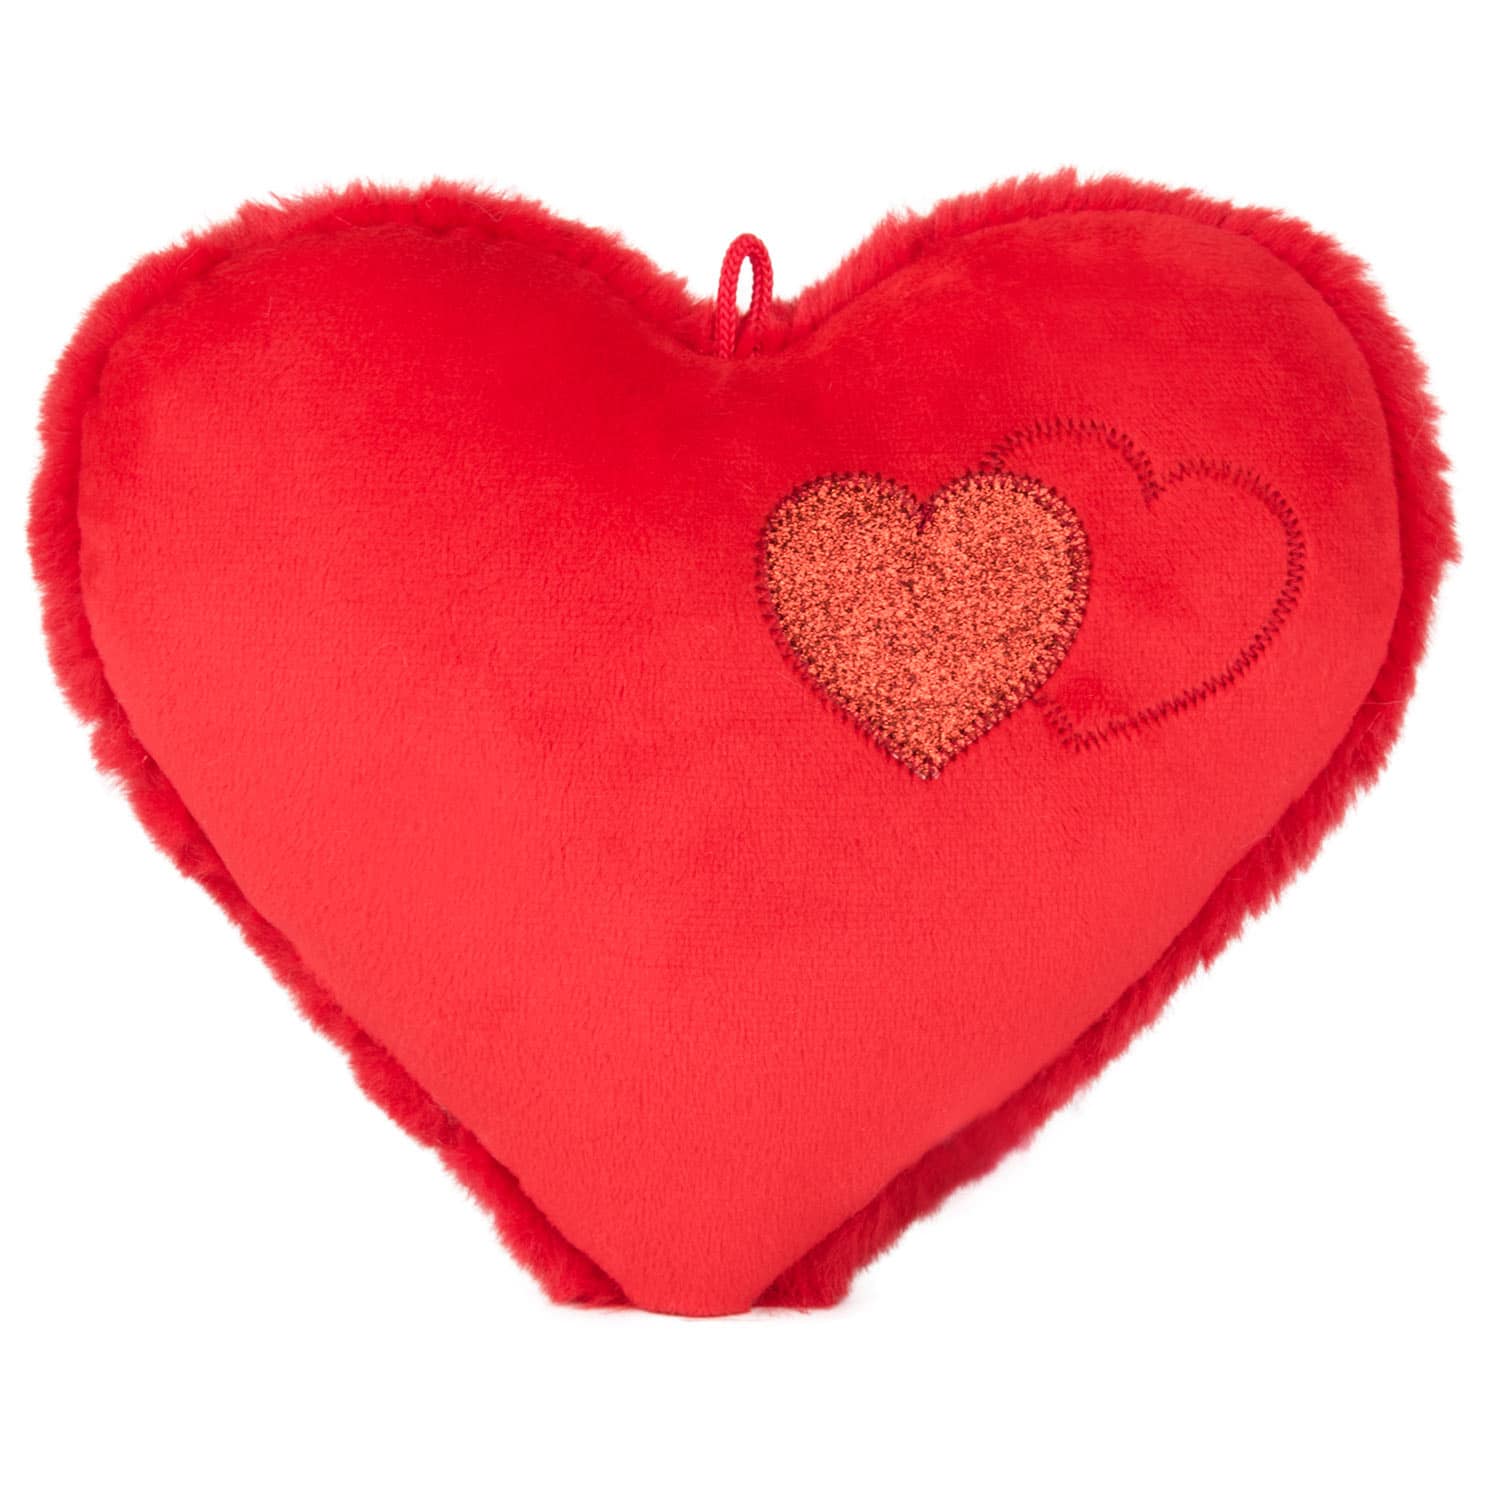 Heart with red embroidery